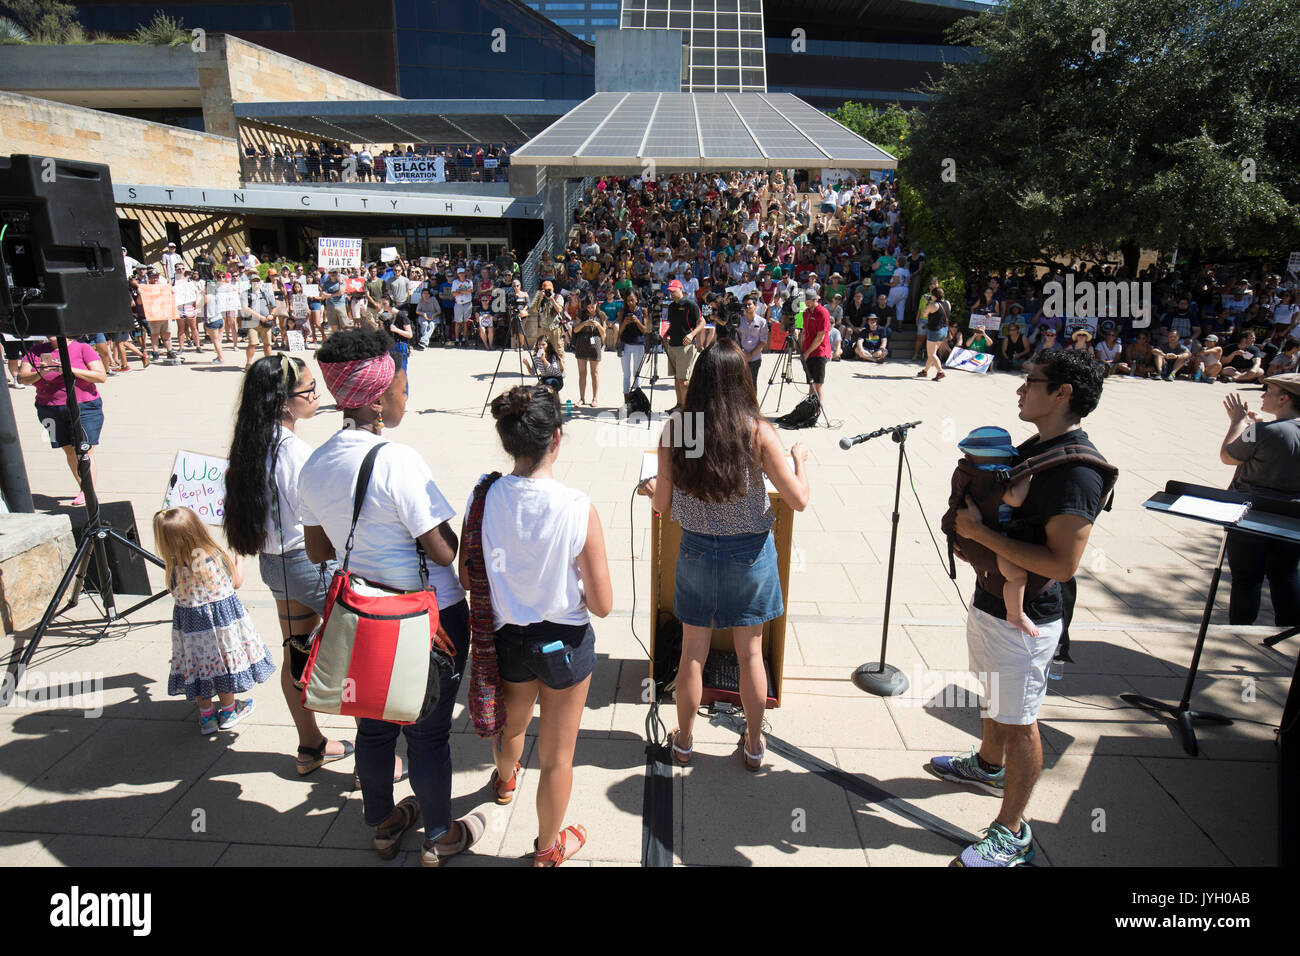 Young woman speaks to activists and protesters at Austin City Hall for a hot two-hour rally against racism and President Donald Trump's apparent insensitive comments about recent Charlottesville violence that left one dead. About 1,000 gathered in the August Texas heat. Stock Photo